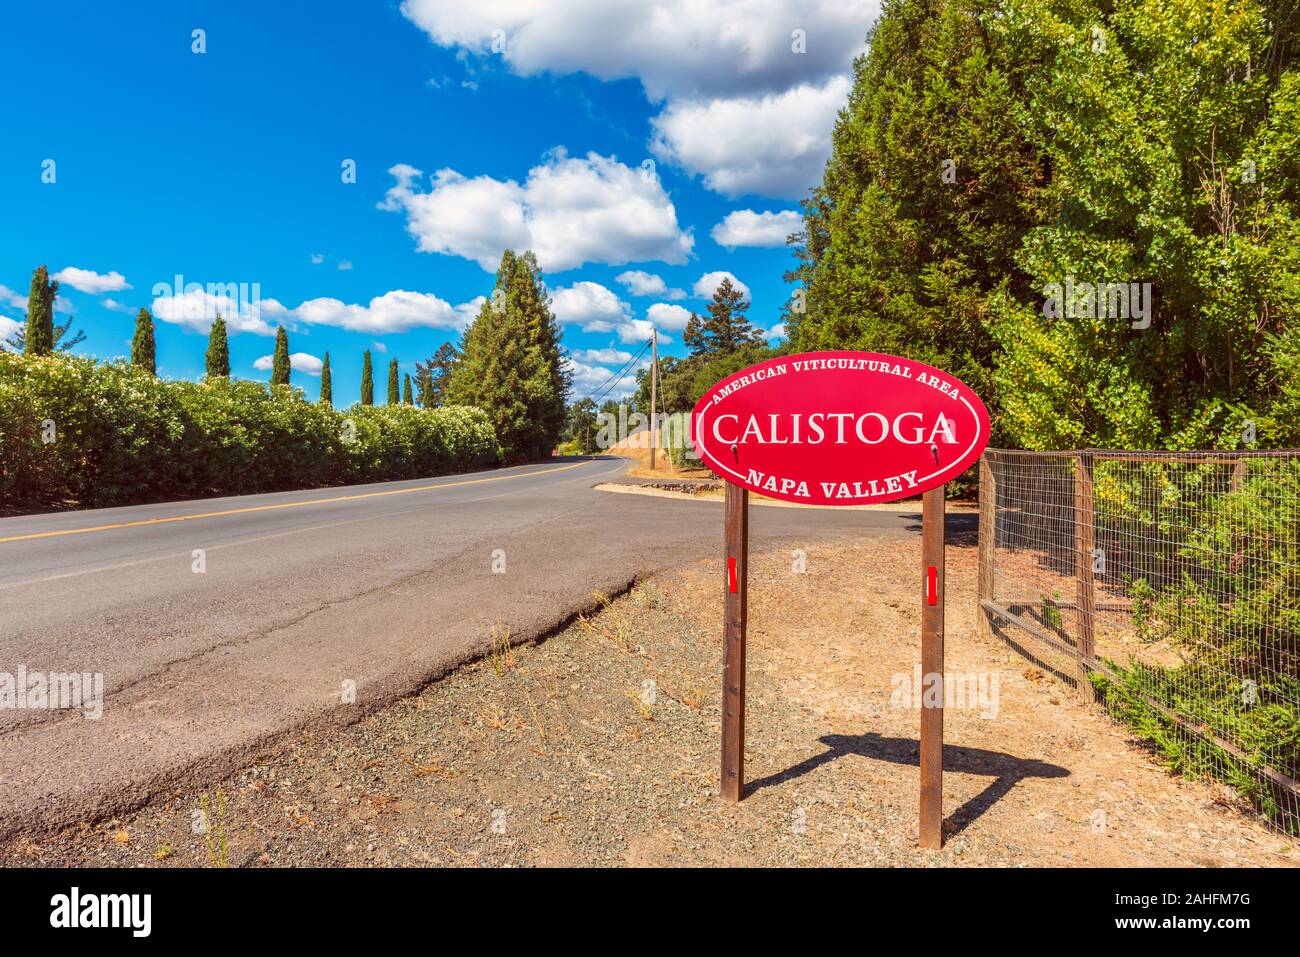 Entrance Sign to Calistoga in Napa Valley, California, USA. Calistoga is a city located in the center of Napa County, California's Wine Country. Stock Photo